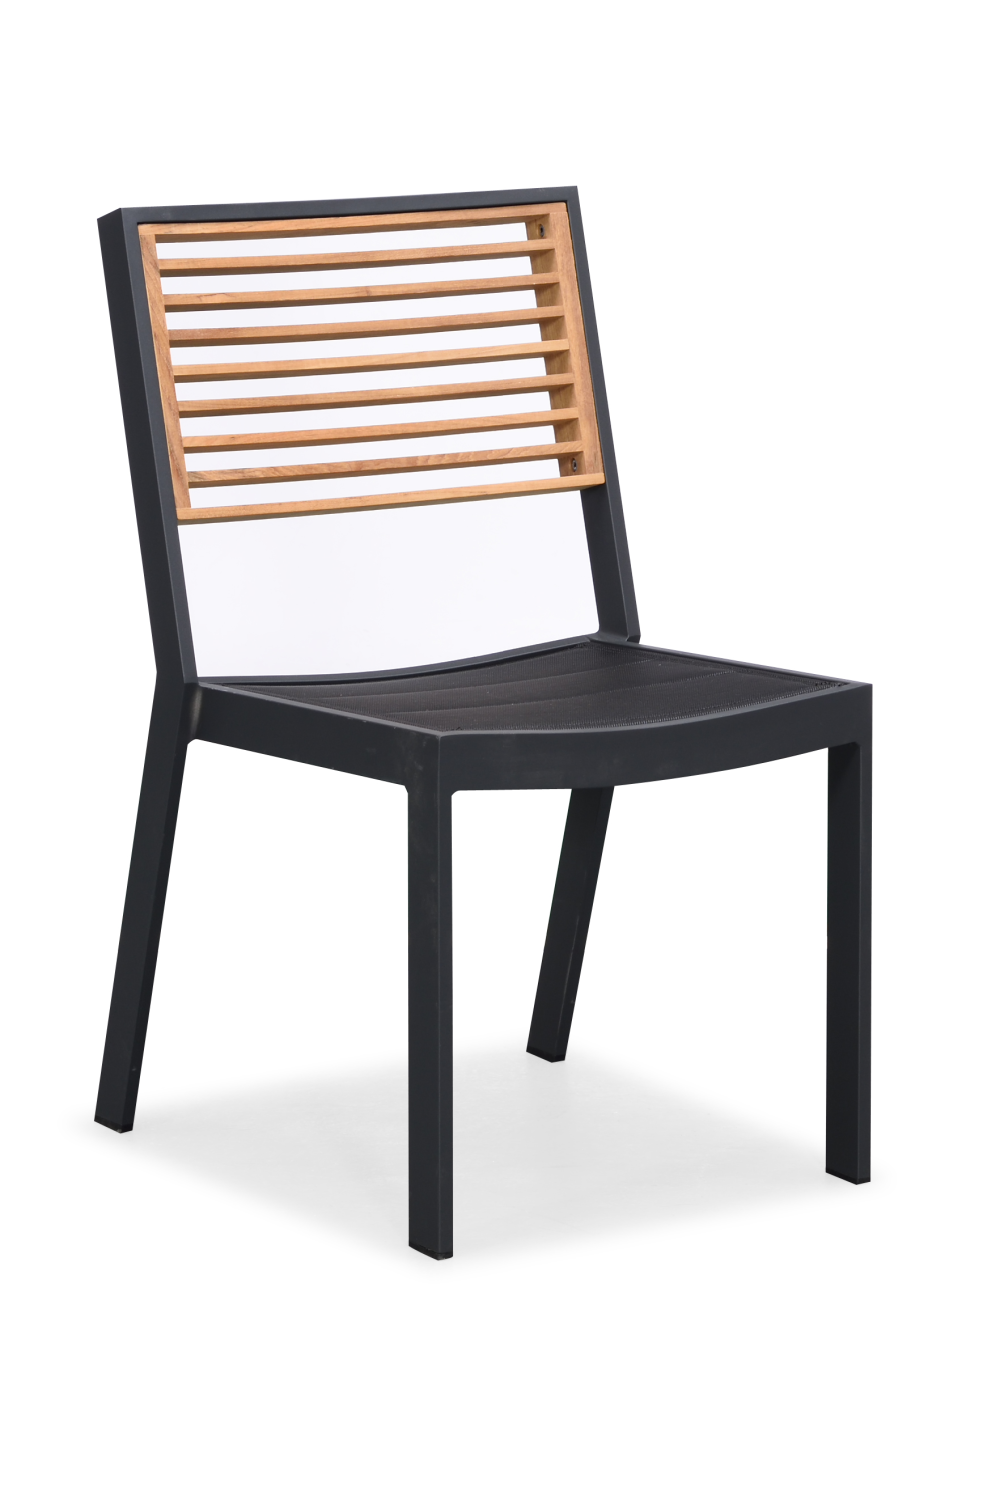 Outdoor Dining Set (6 chairs) | Higold York | OROA.com